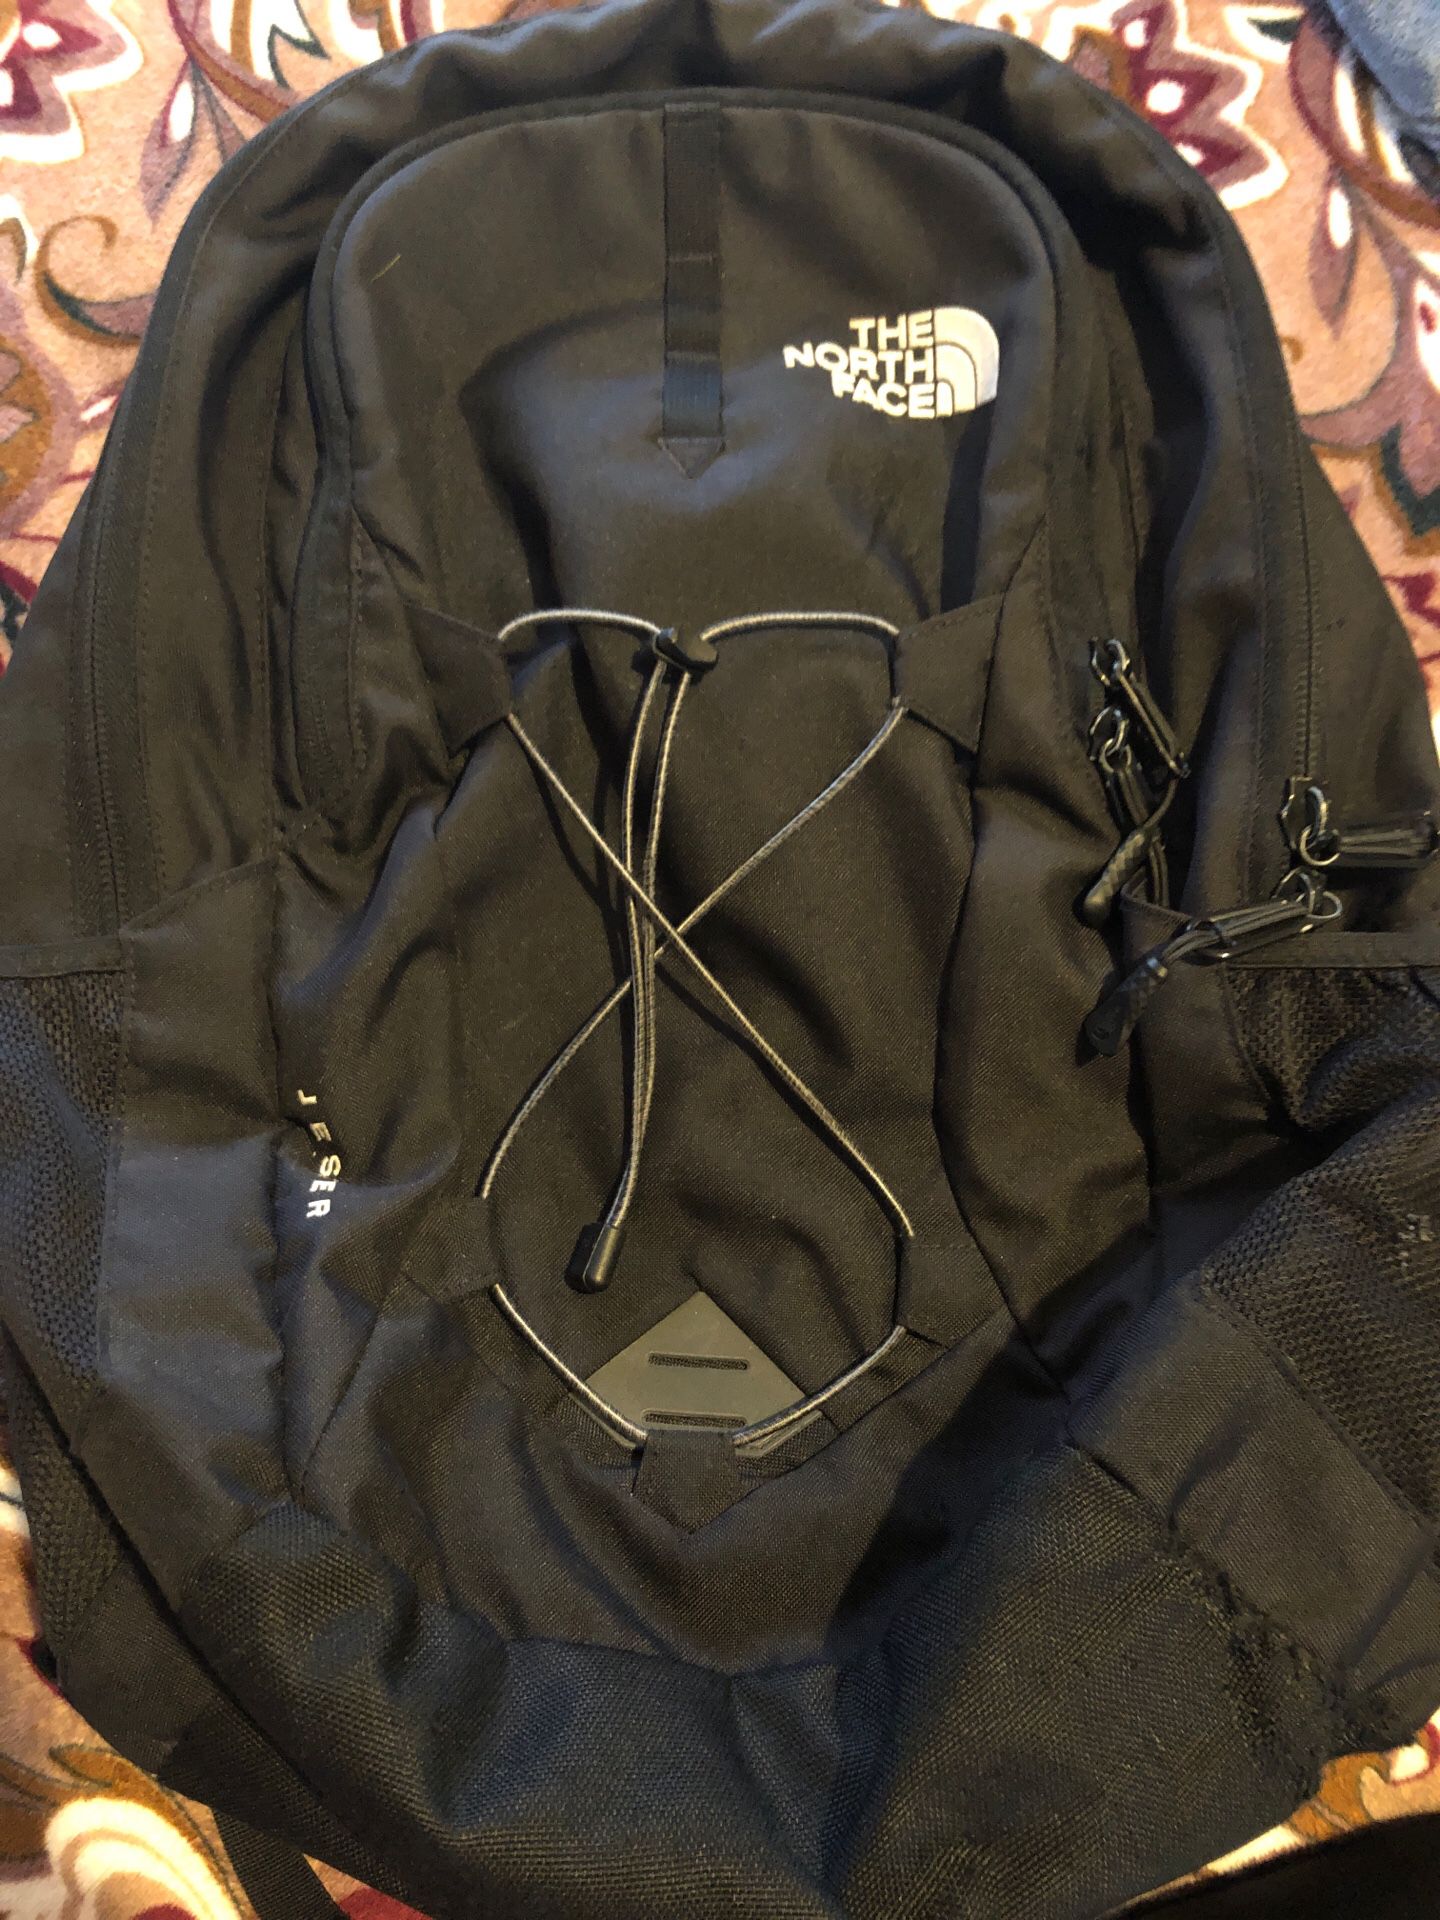 Free North Face Jester Backpack